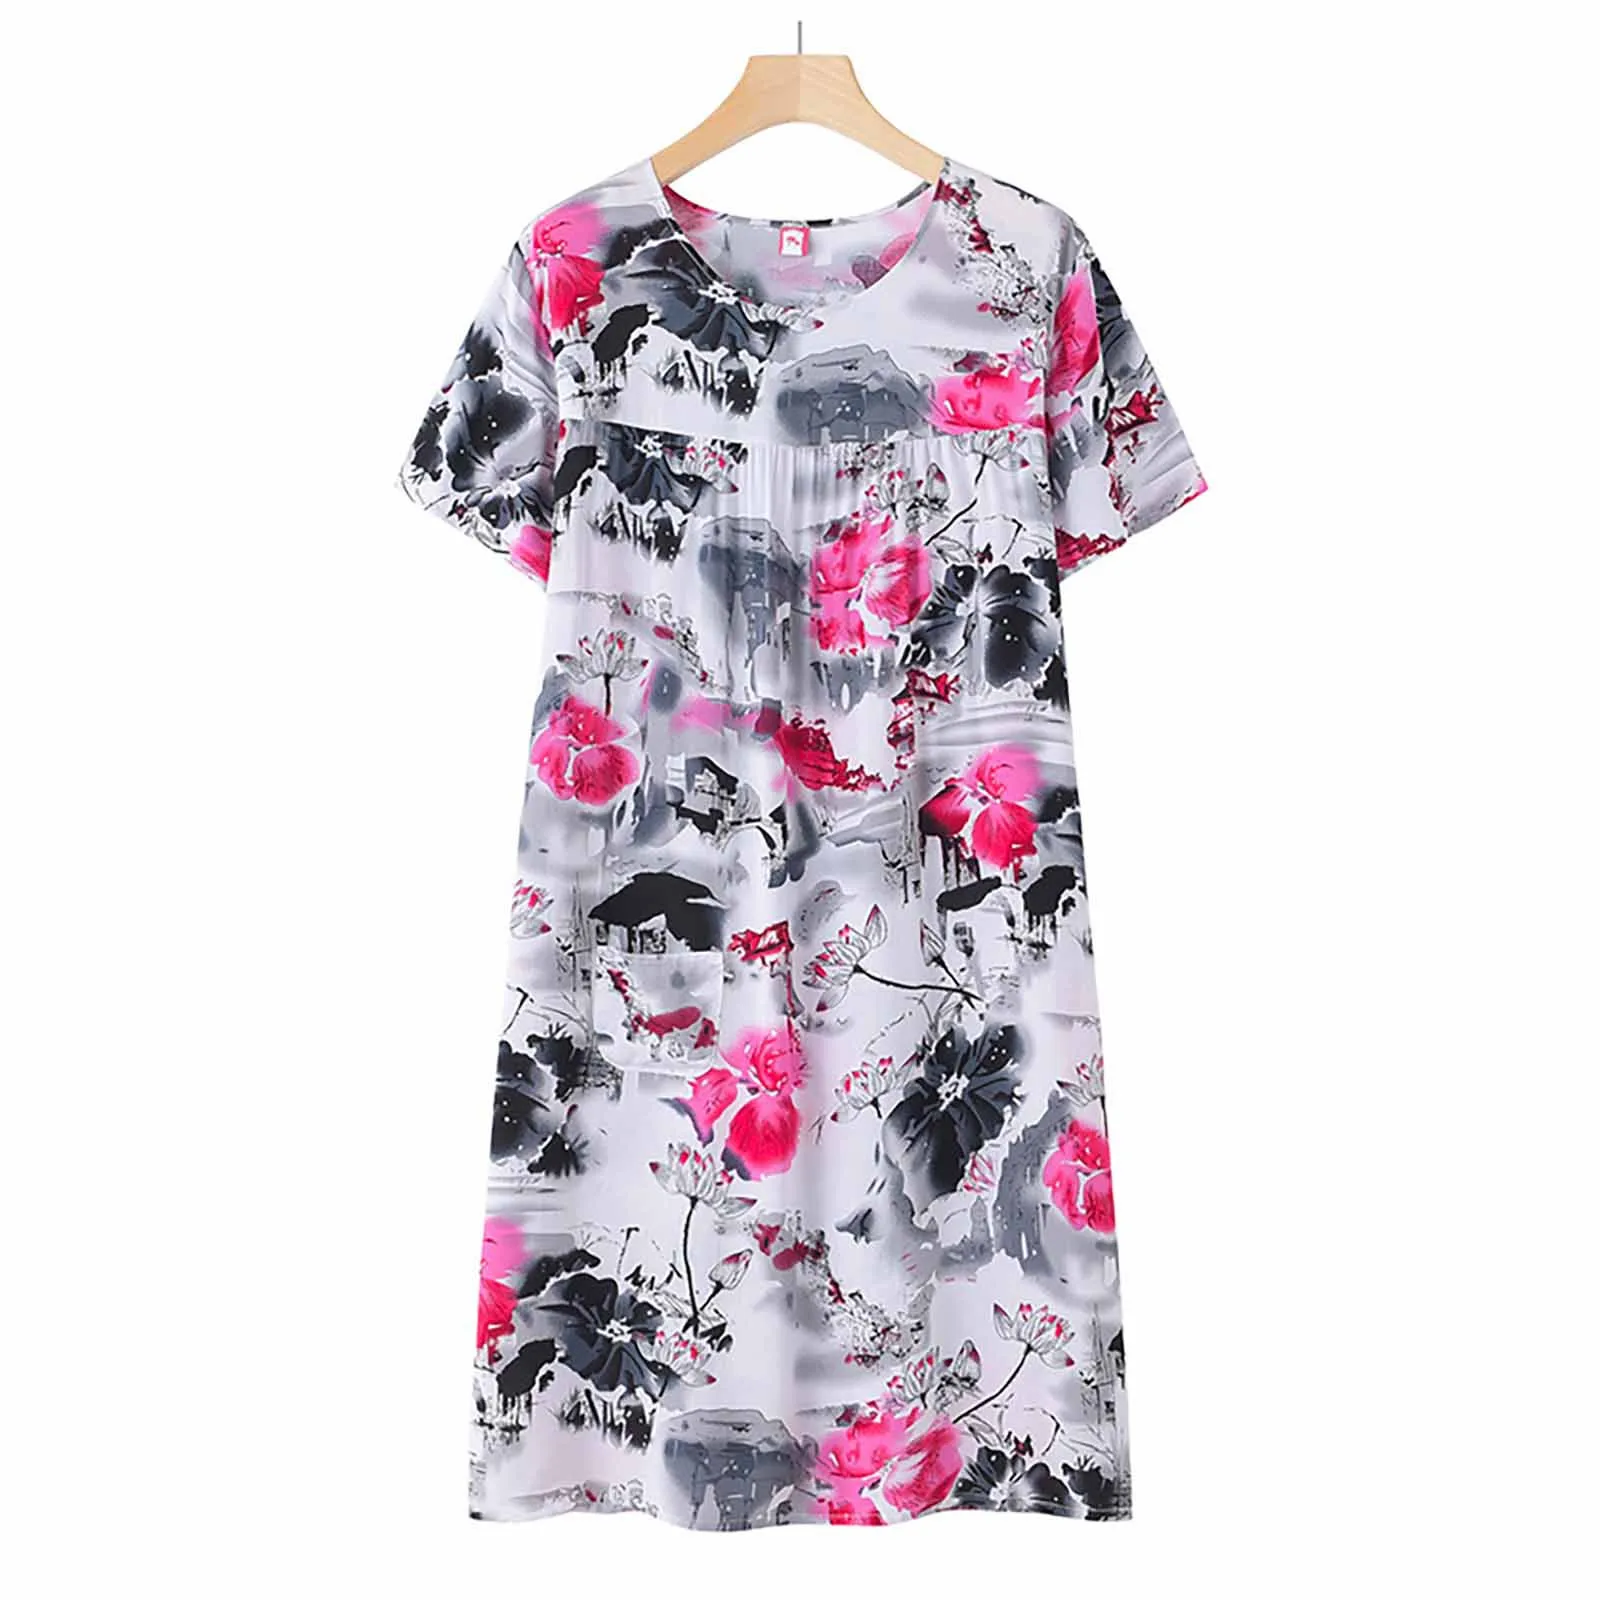 

New Sleepwear Floral Print Cotton Pajamas for Women Long Dress Short Sleeved Summer Loungewear Fashion Home Clothes Nightgowns